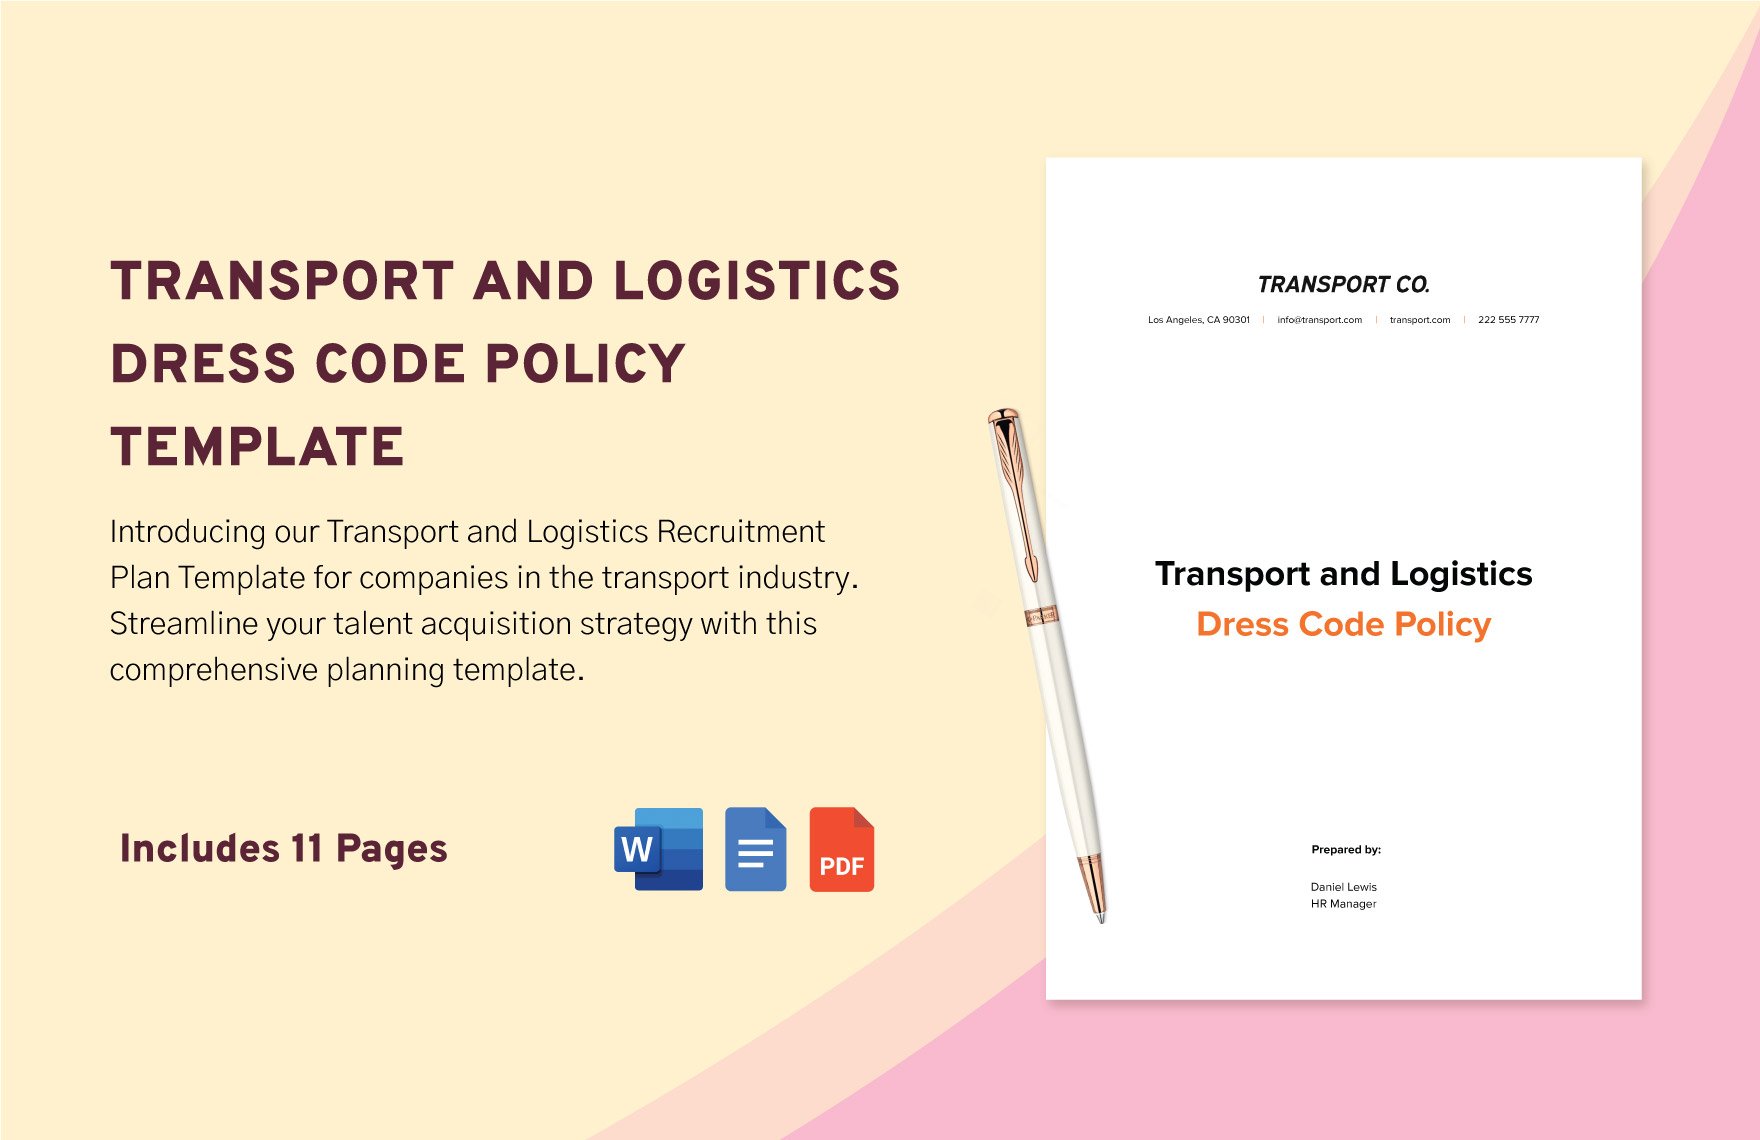 Transport and Logistics Dress Code Policy Template